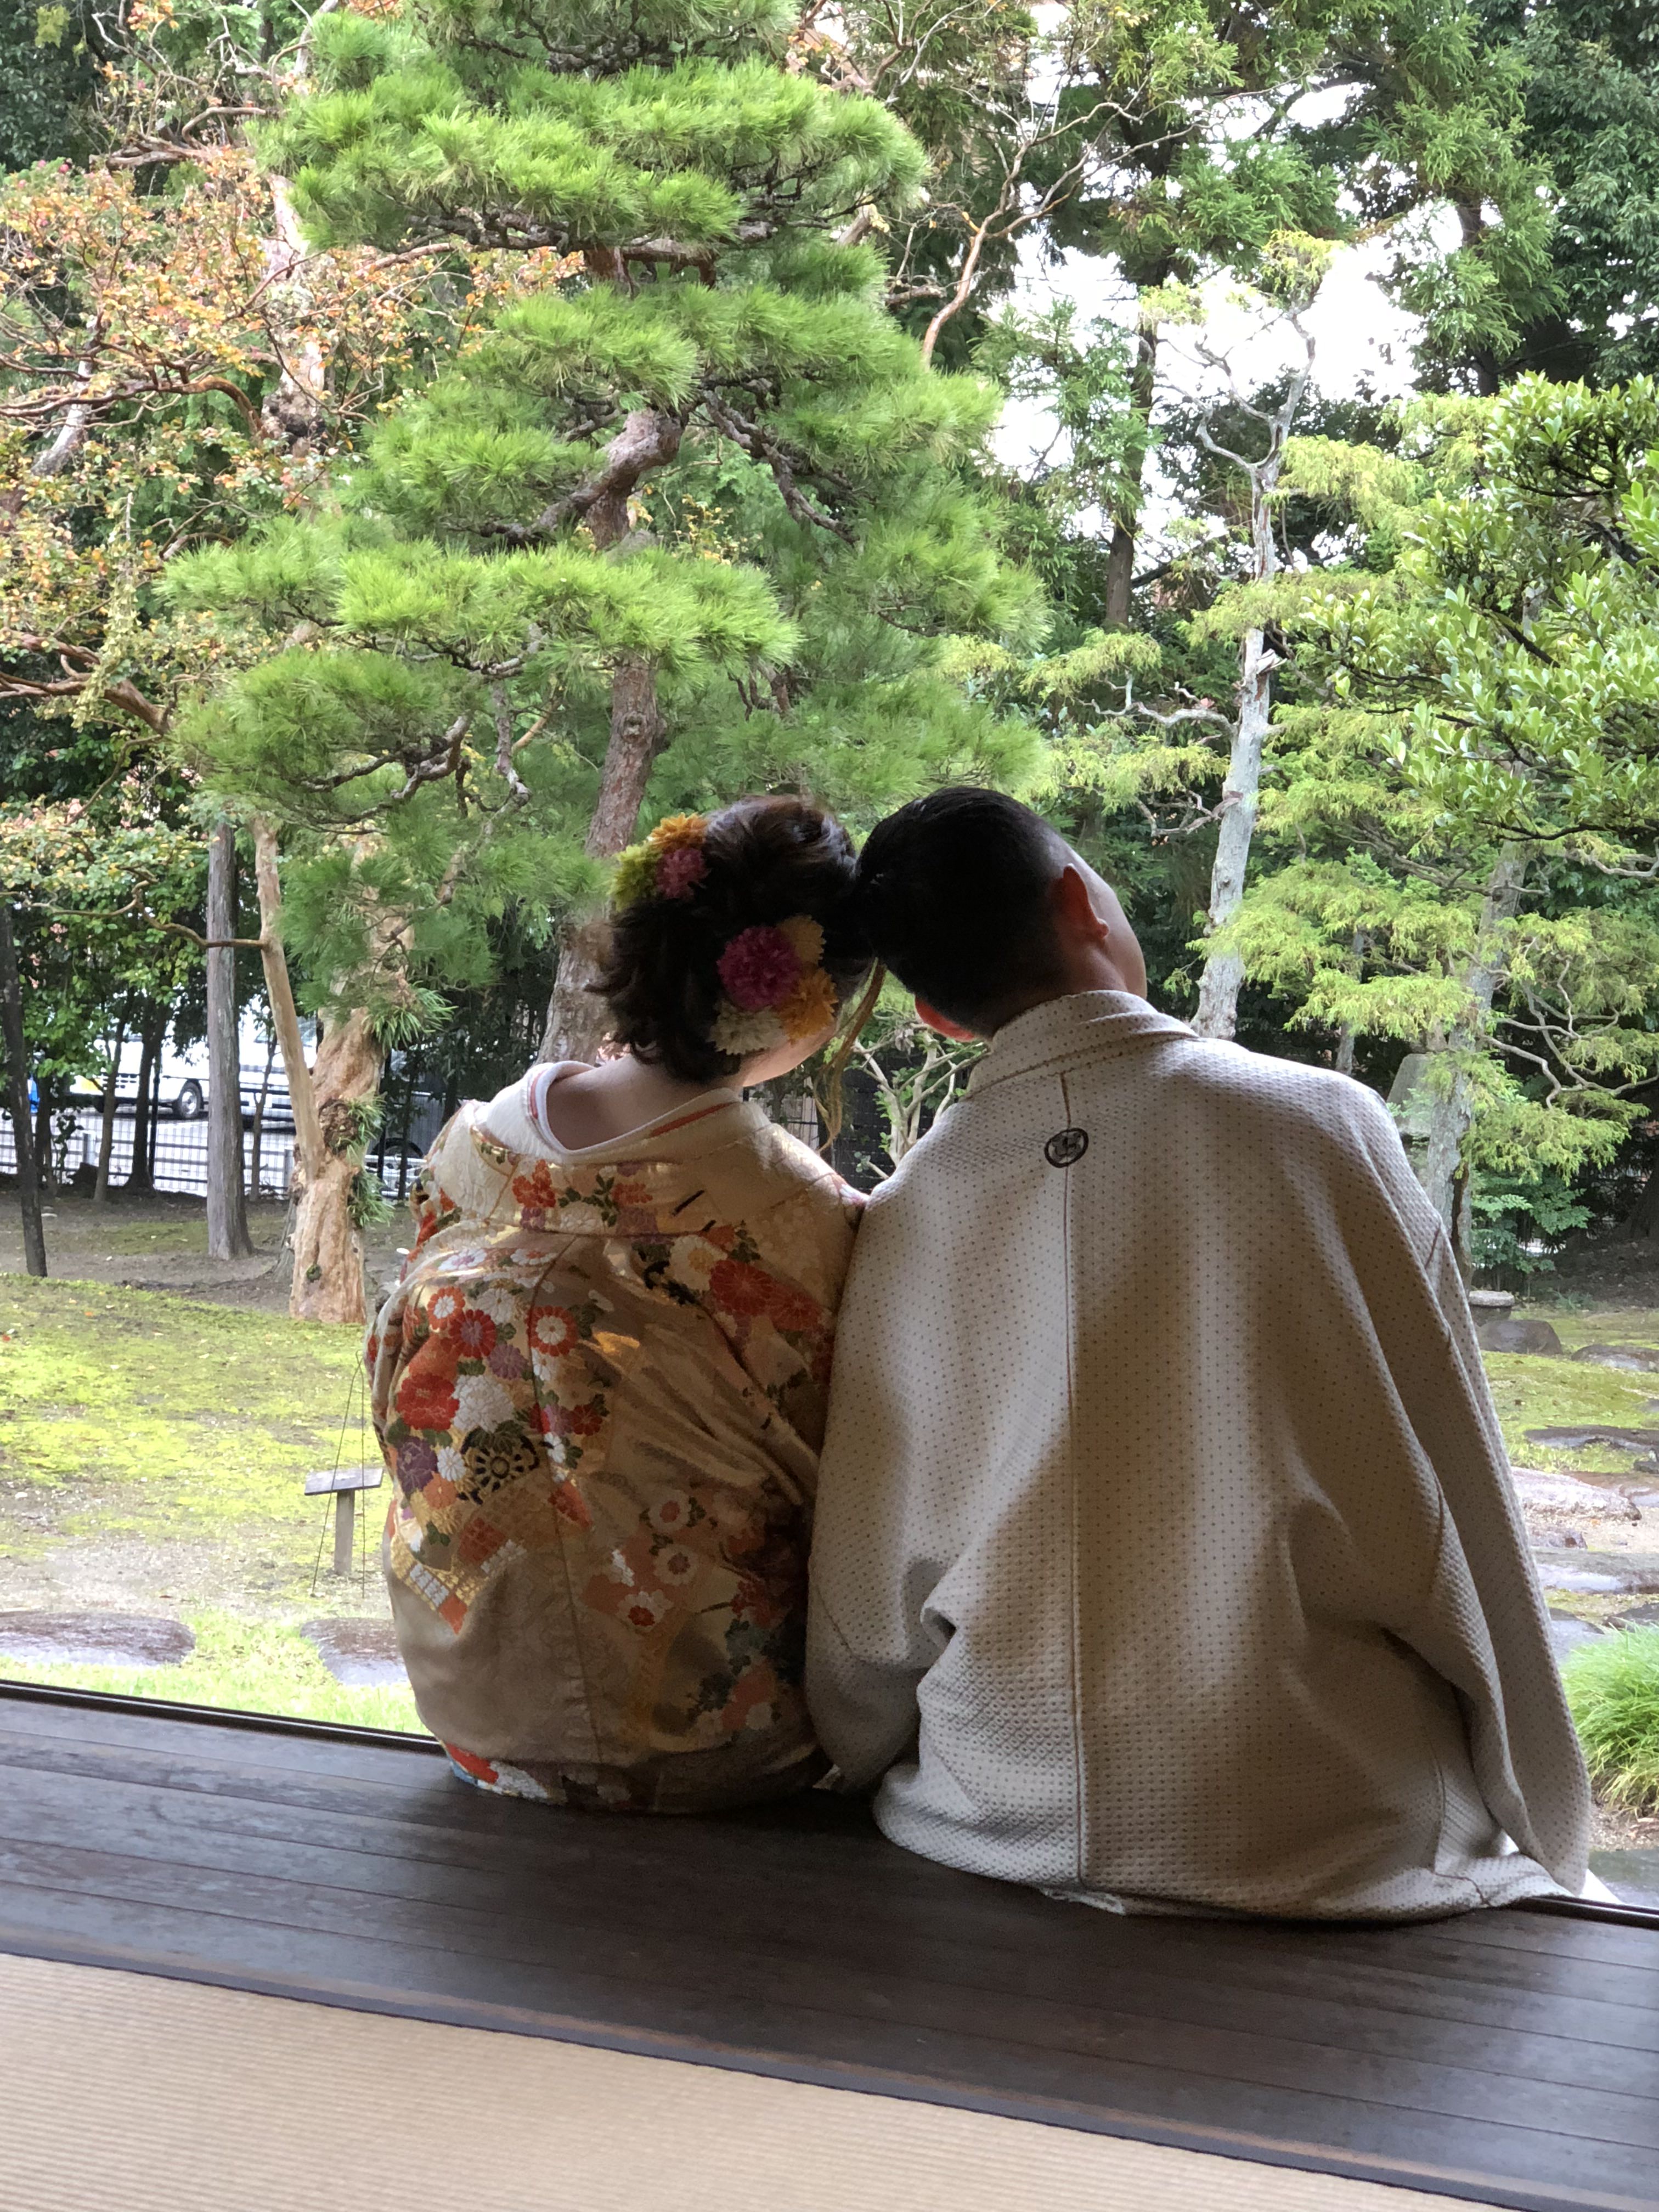 11 – Newly wed couple, Japan